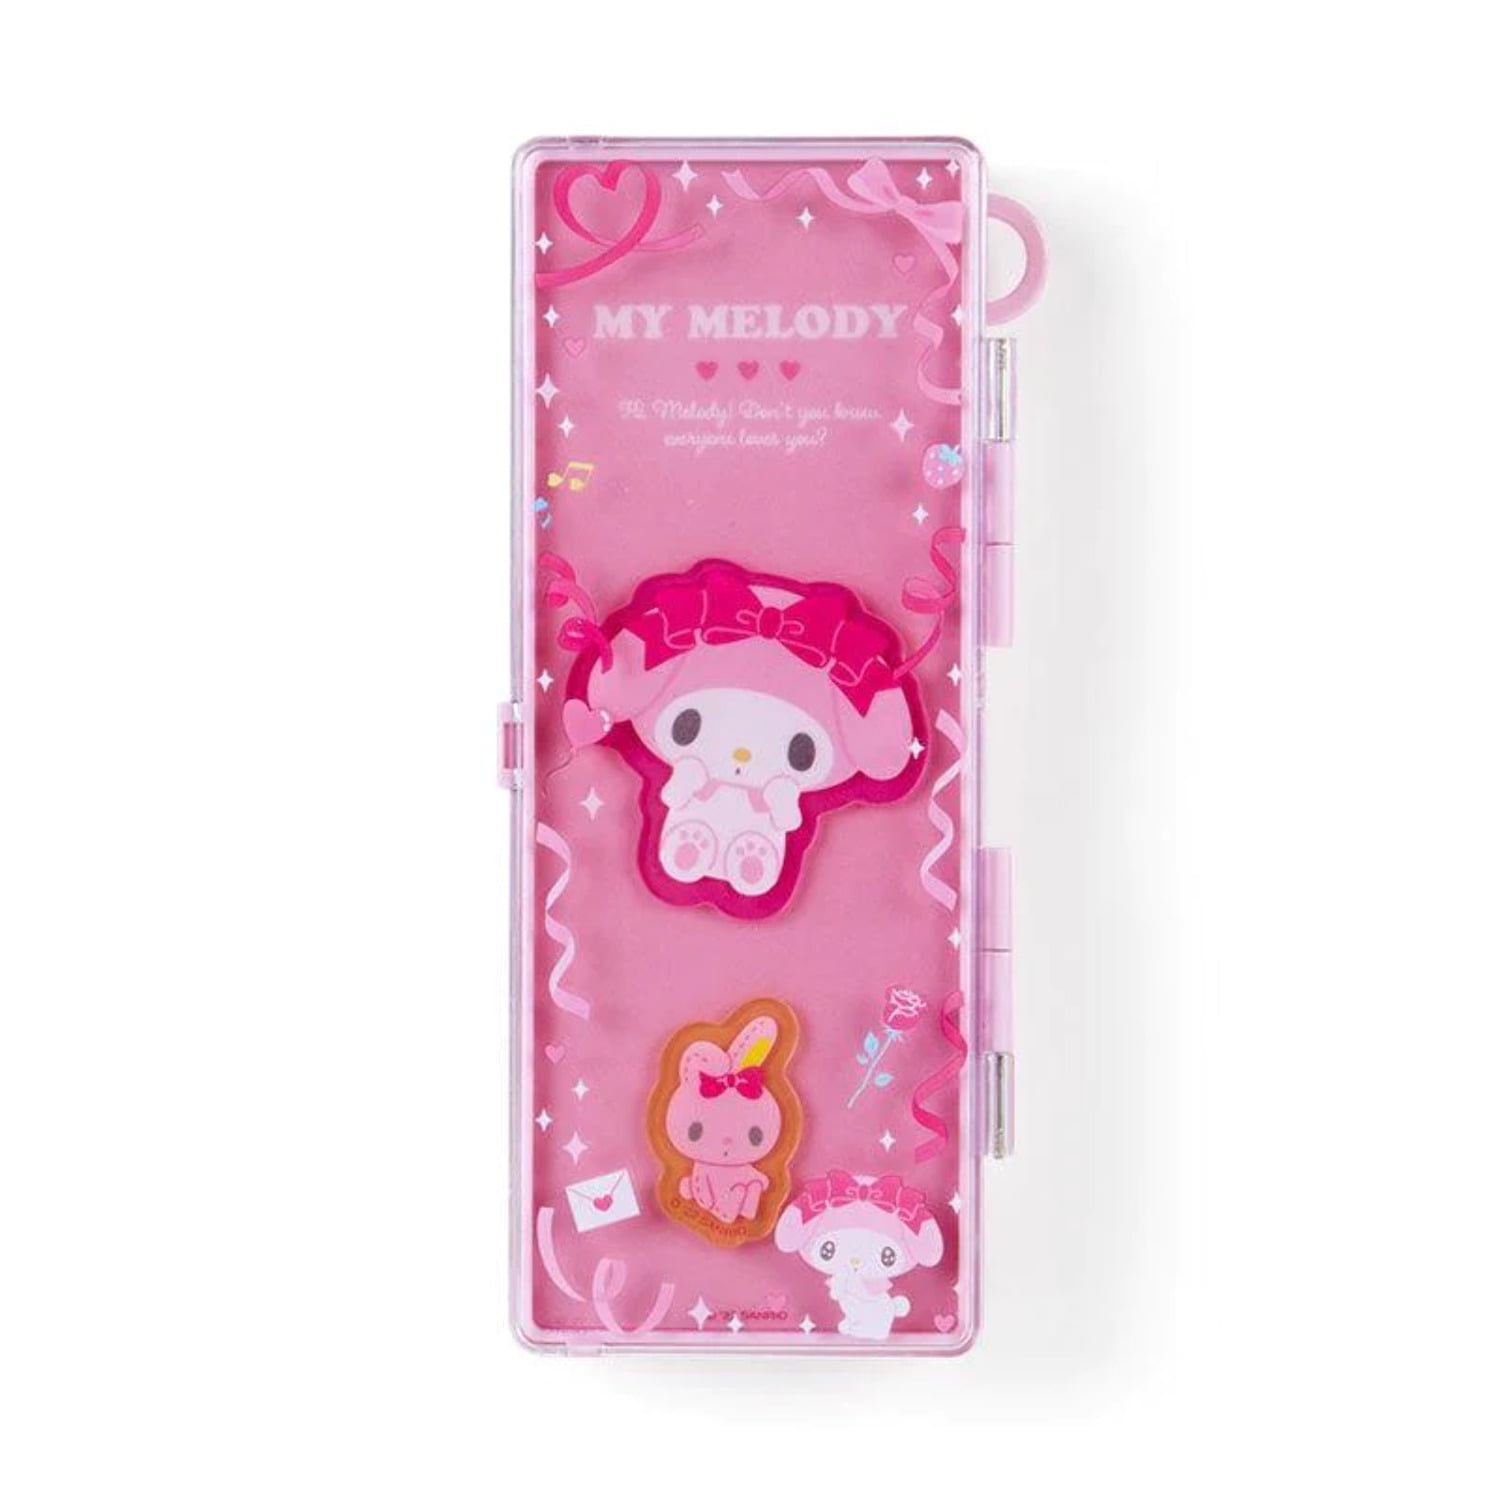 Buy Sanrio My Melody Accessories Zipped Pencil Case with Folded Ends at  ARTBOX